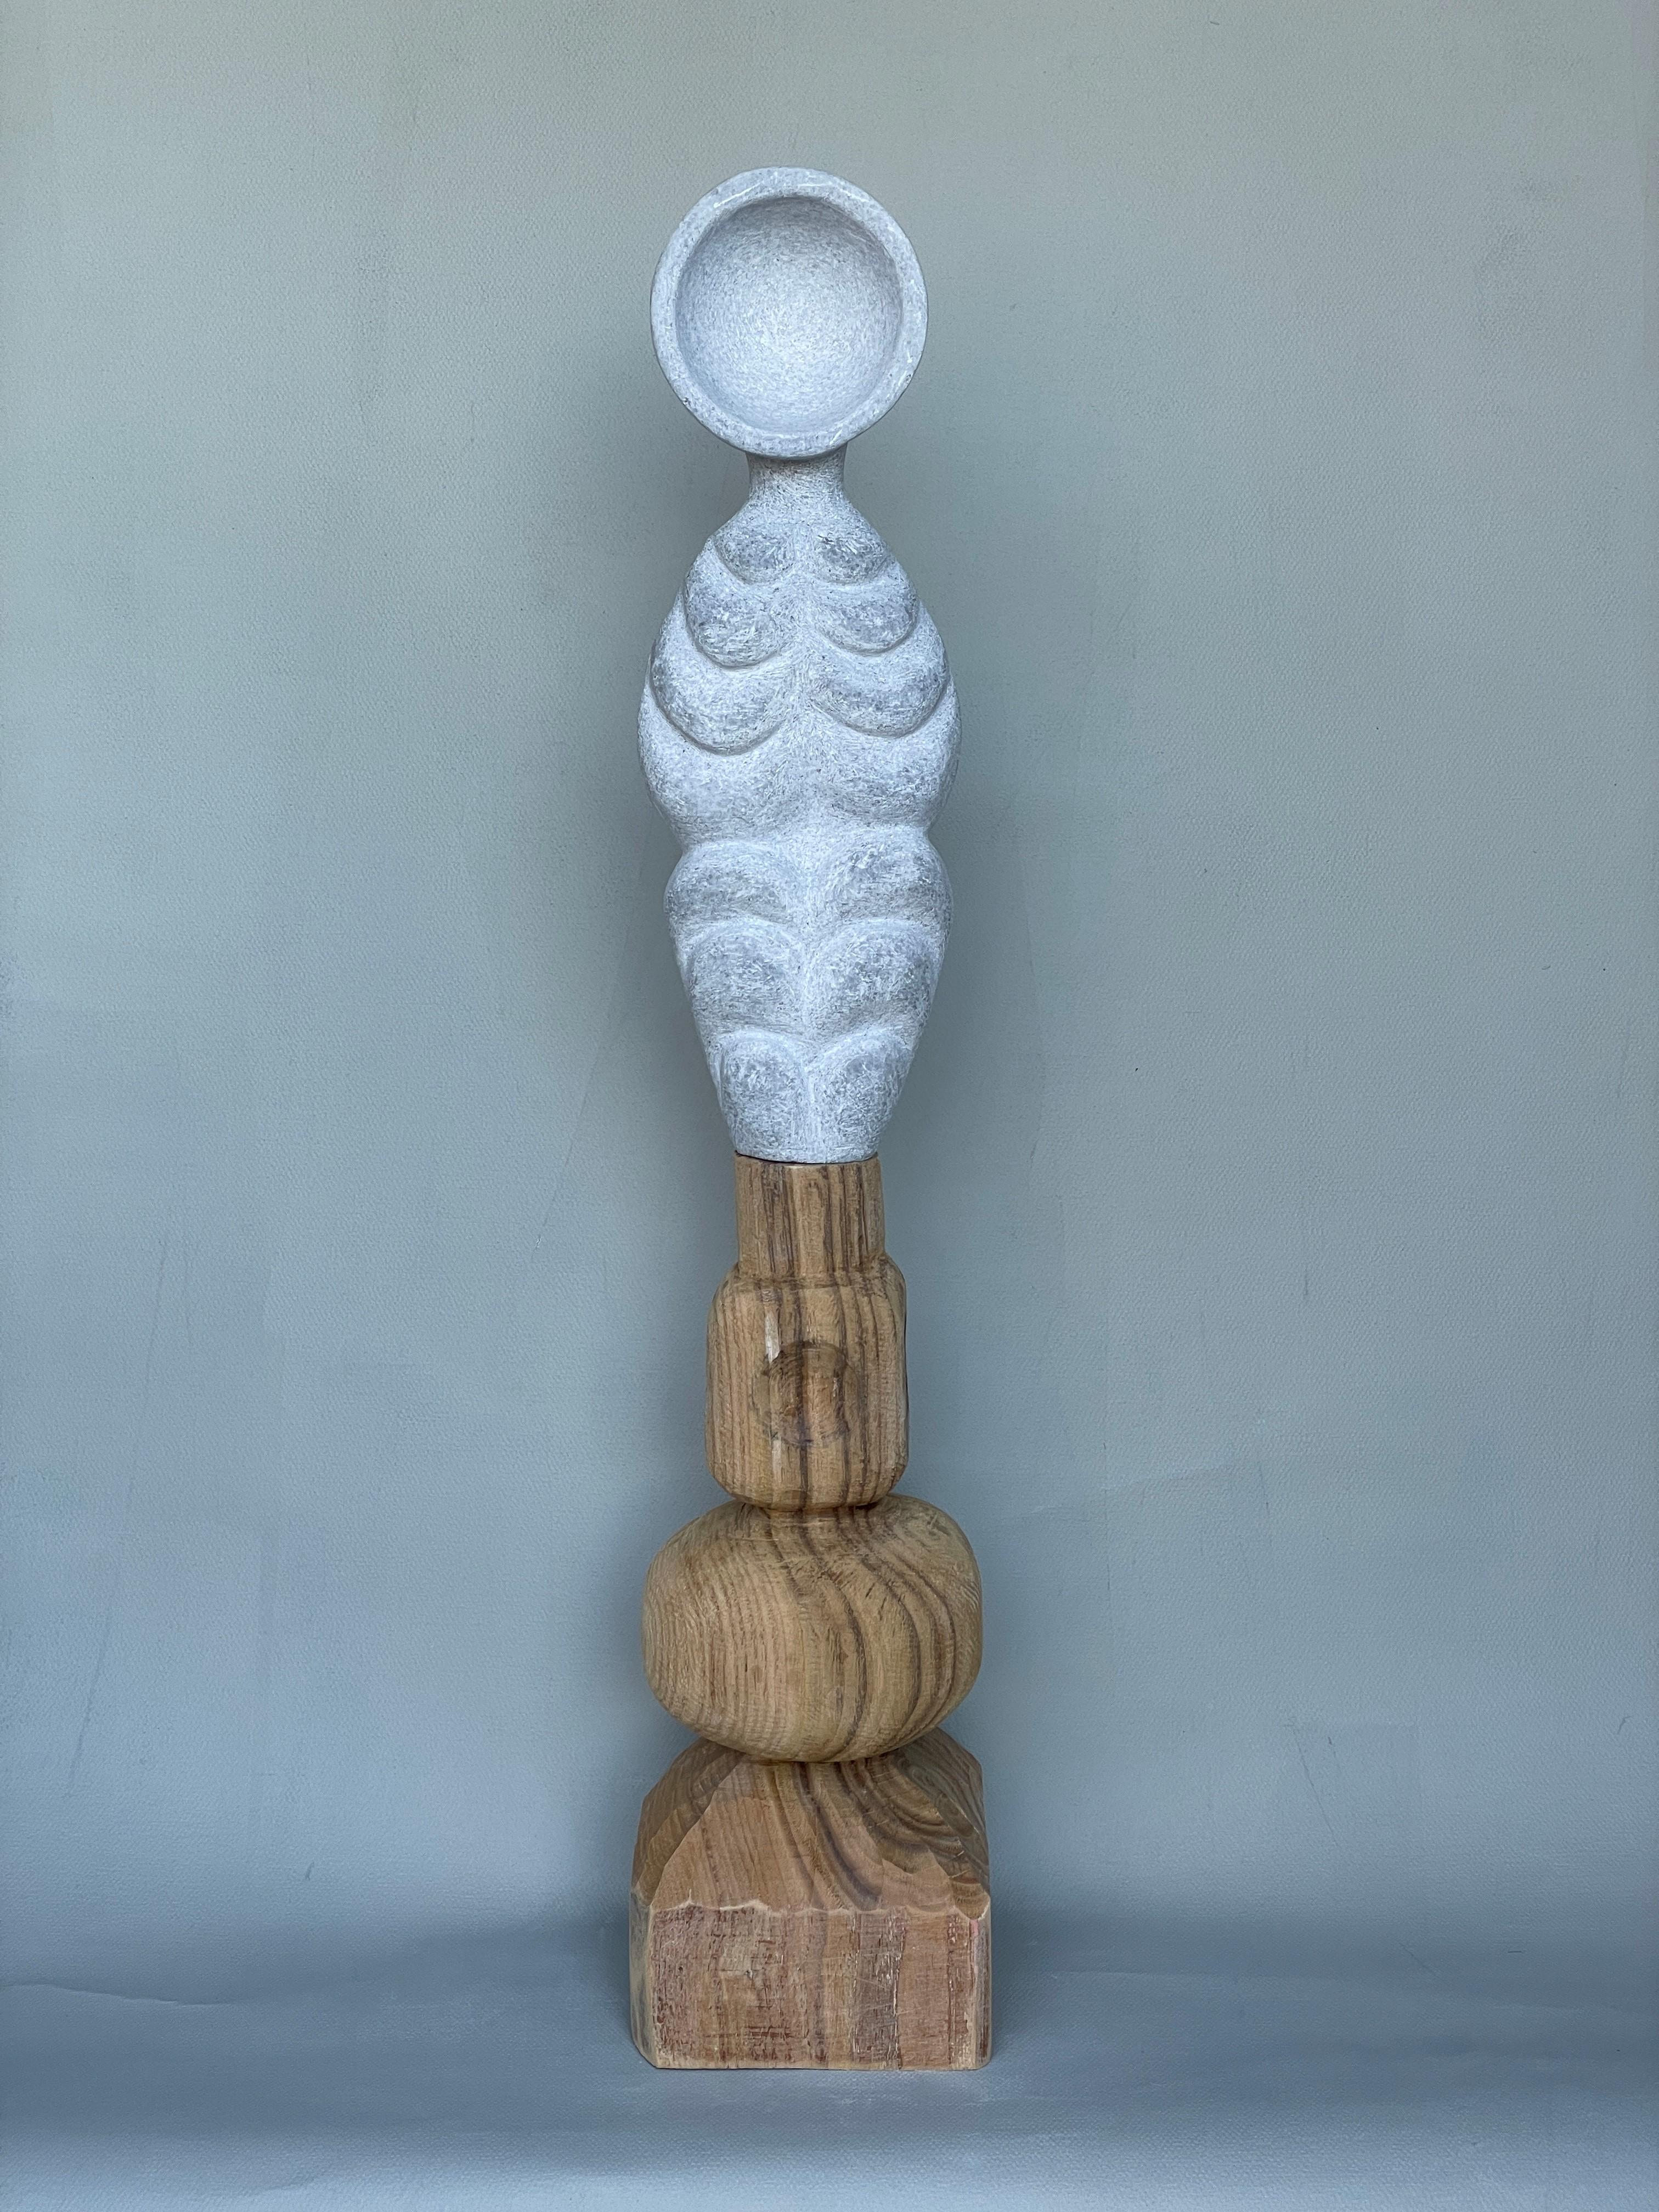 Echo on wood hand carved marble sculpture by Tom Von Kaenel.
Dimensions: D 15 x W 15 x H 76 cm.
Materials: marble, wood

Tom von Kaenel, sculptor and painter, was born in Switzerland in 1961. Already in his early childhood he was deeply devoted